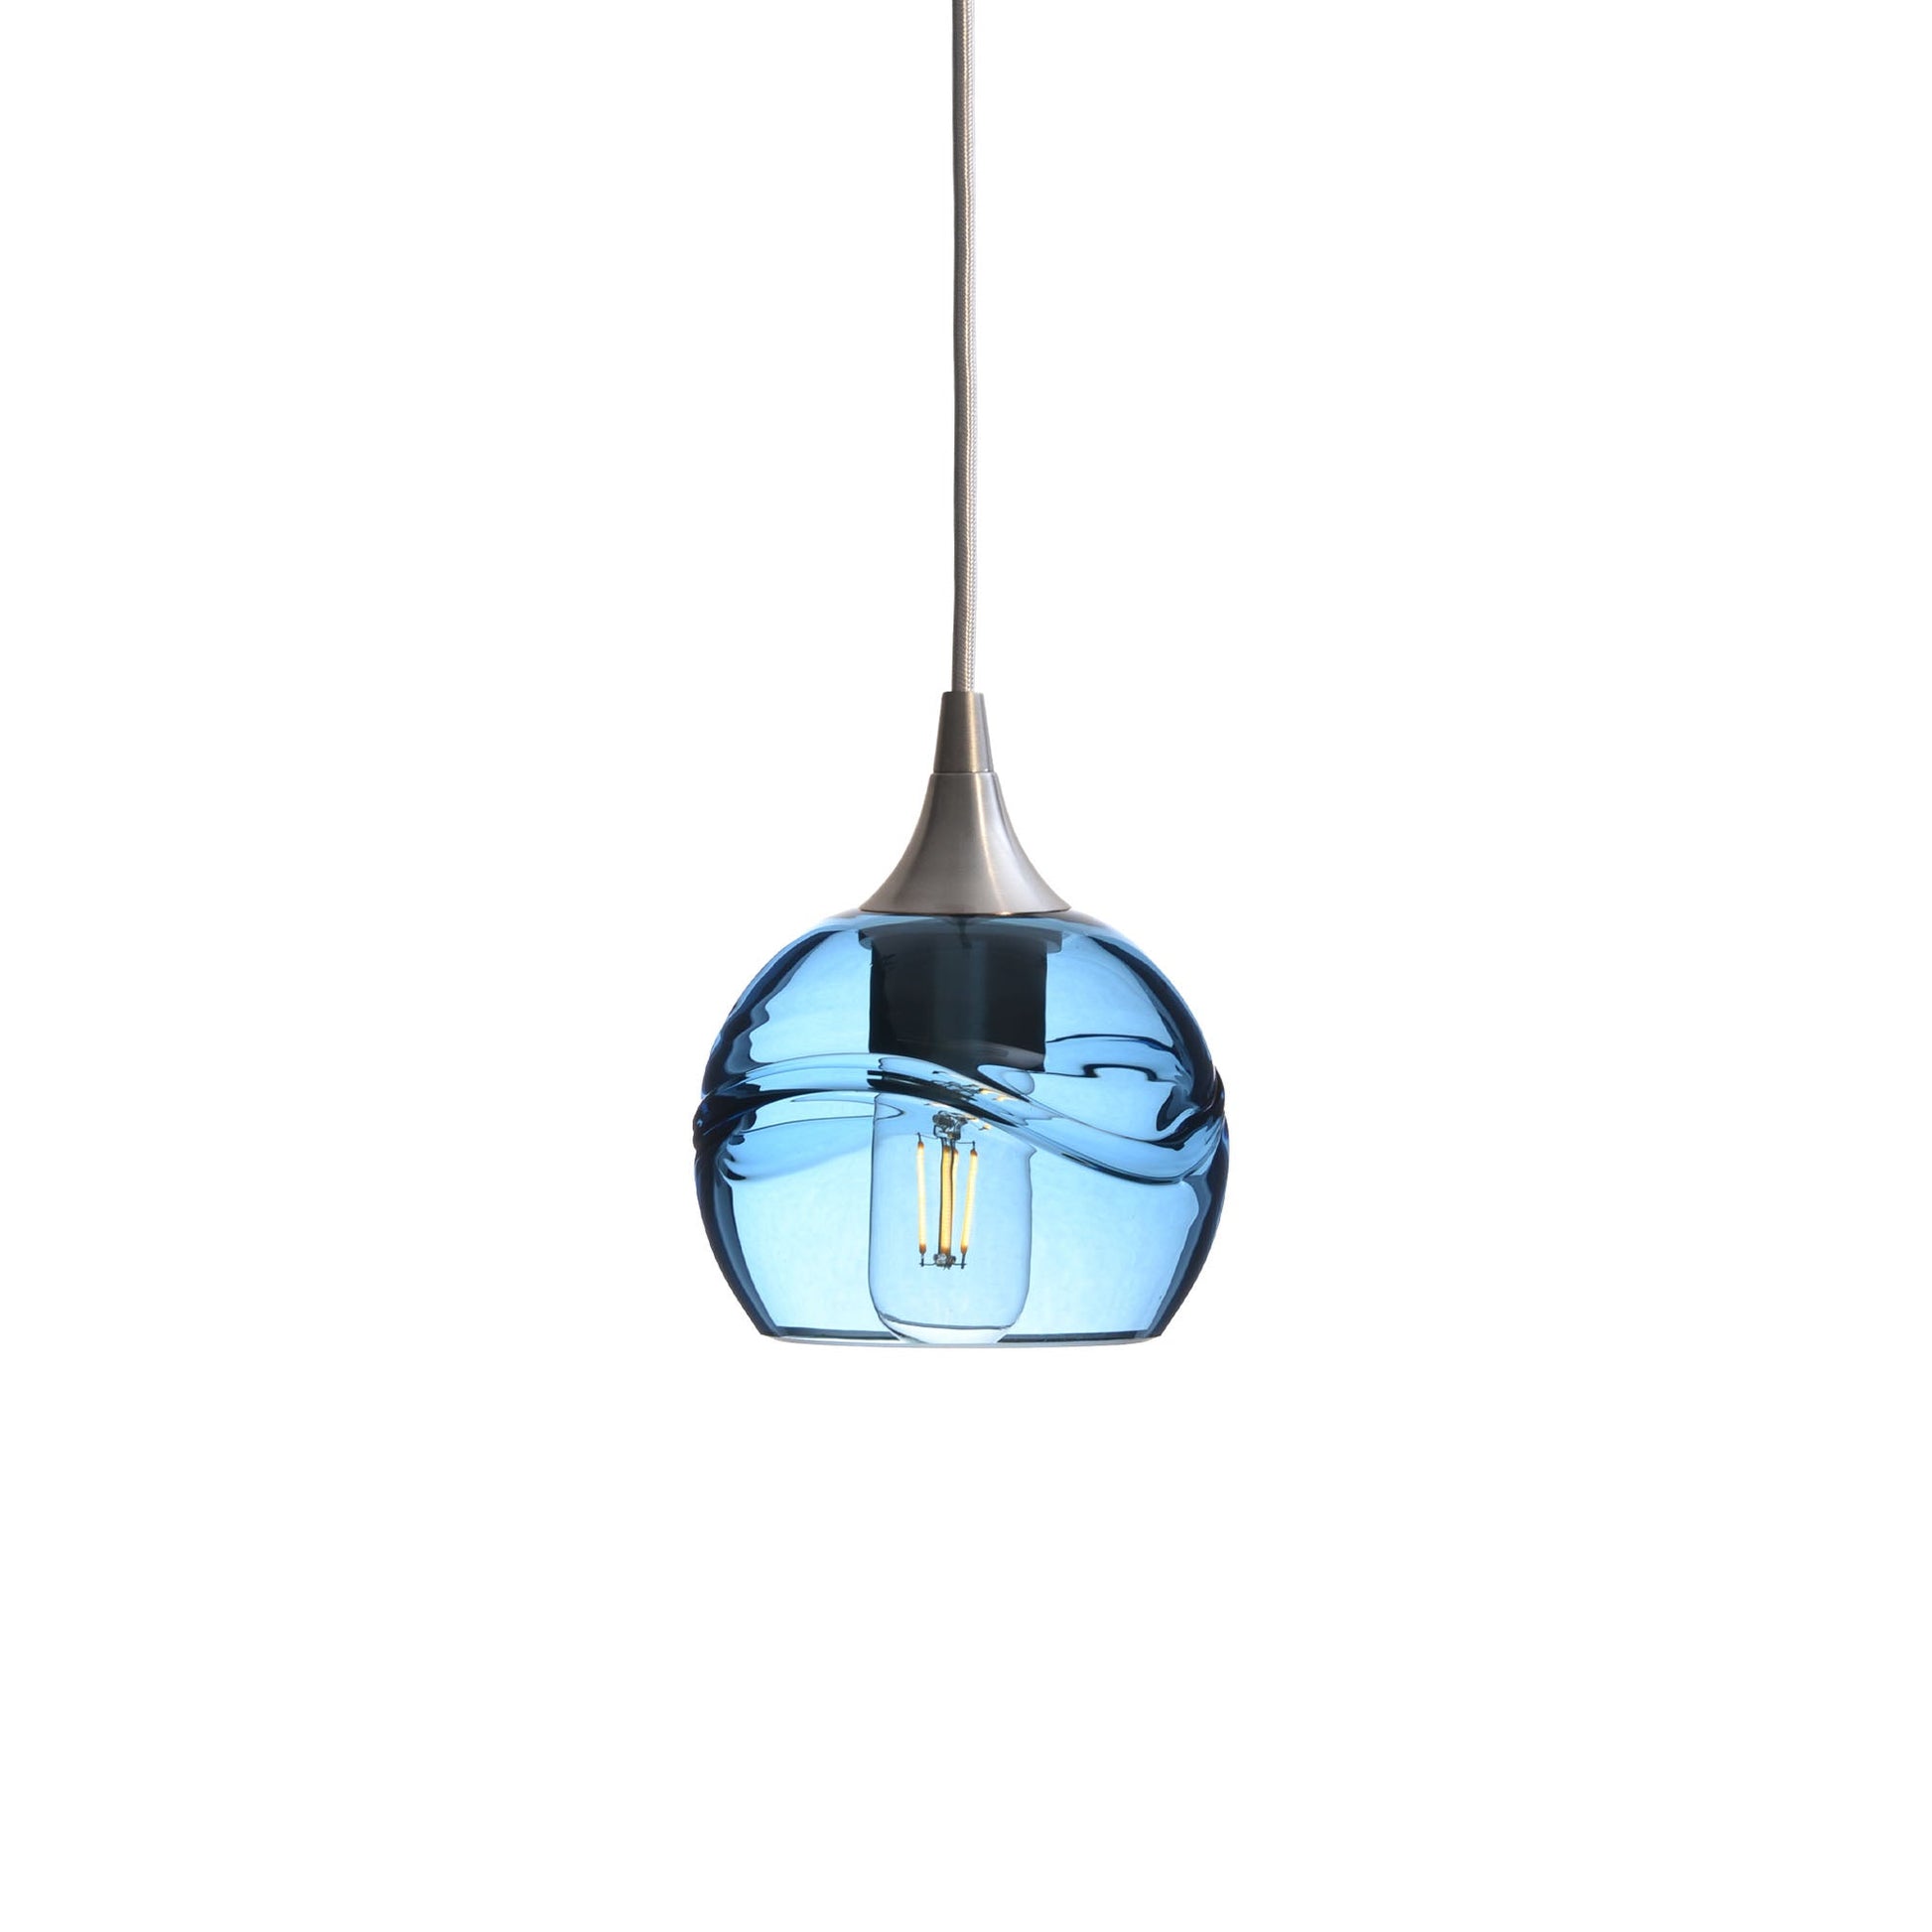 763 Swell: Single Pendant Light-Glass-Bicycle Glass Co - Hotshop-Steel Blue-Brushed Nickel-Bicycle Glass Co